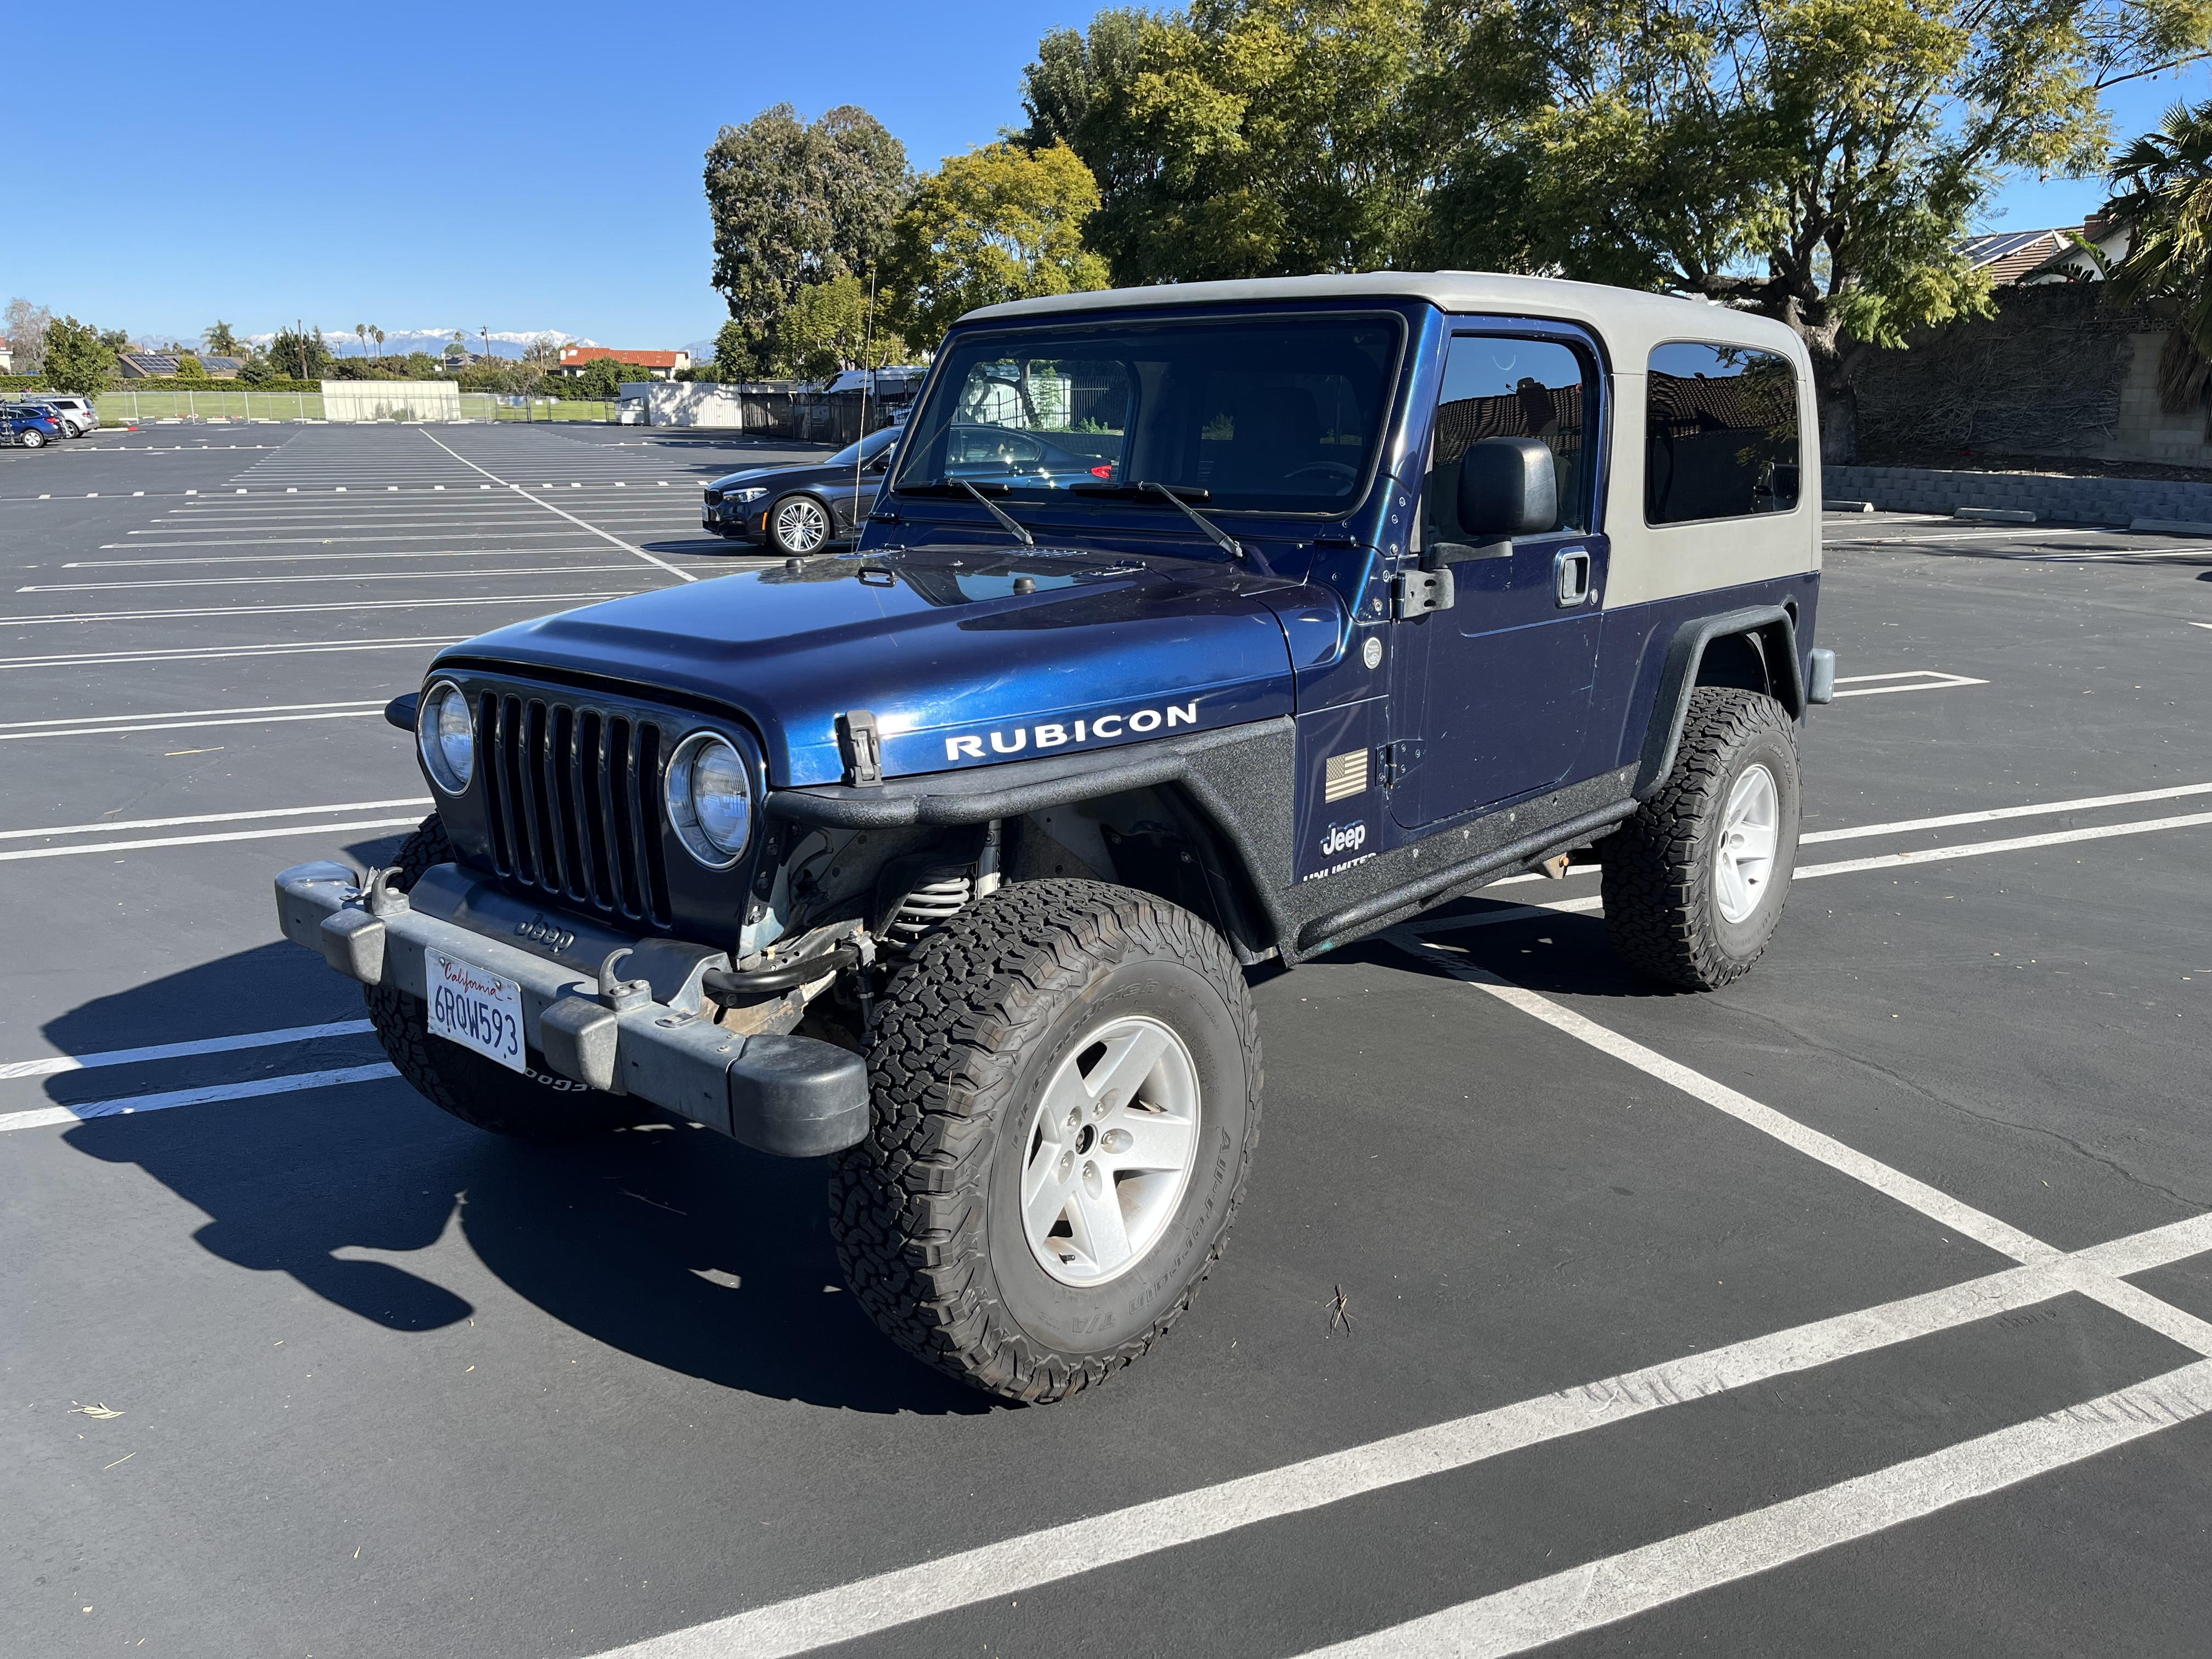 Used 2005 Jeep Wrangler for Sale in Long Beach, CA (Test Drive at Home) -  Kelley Blue Book